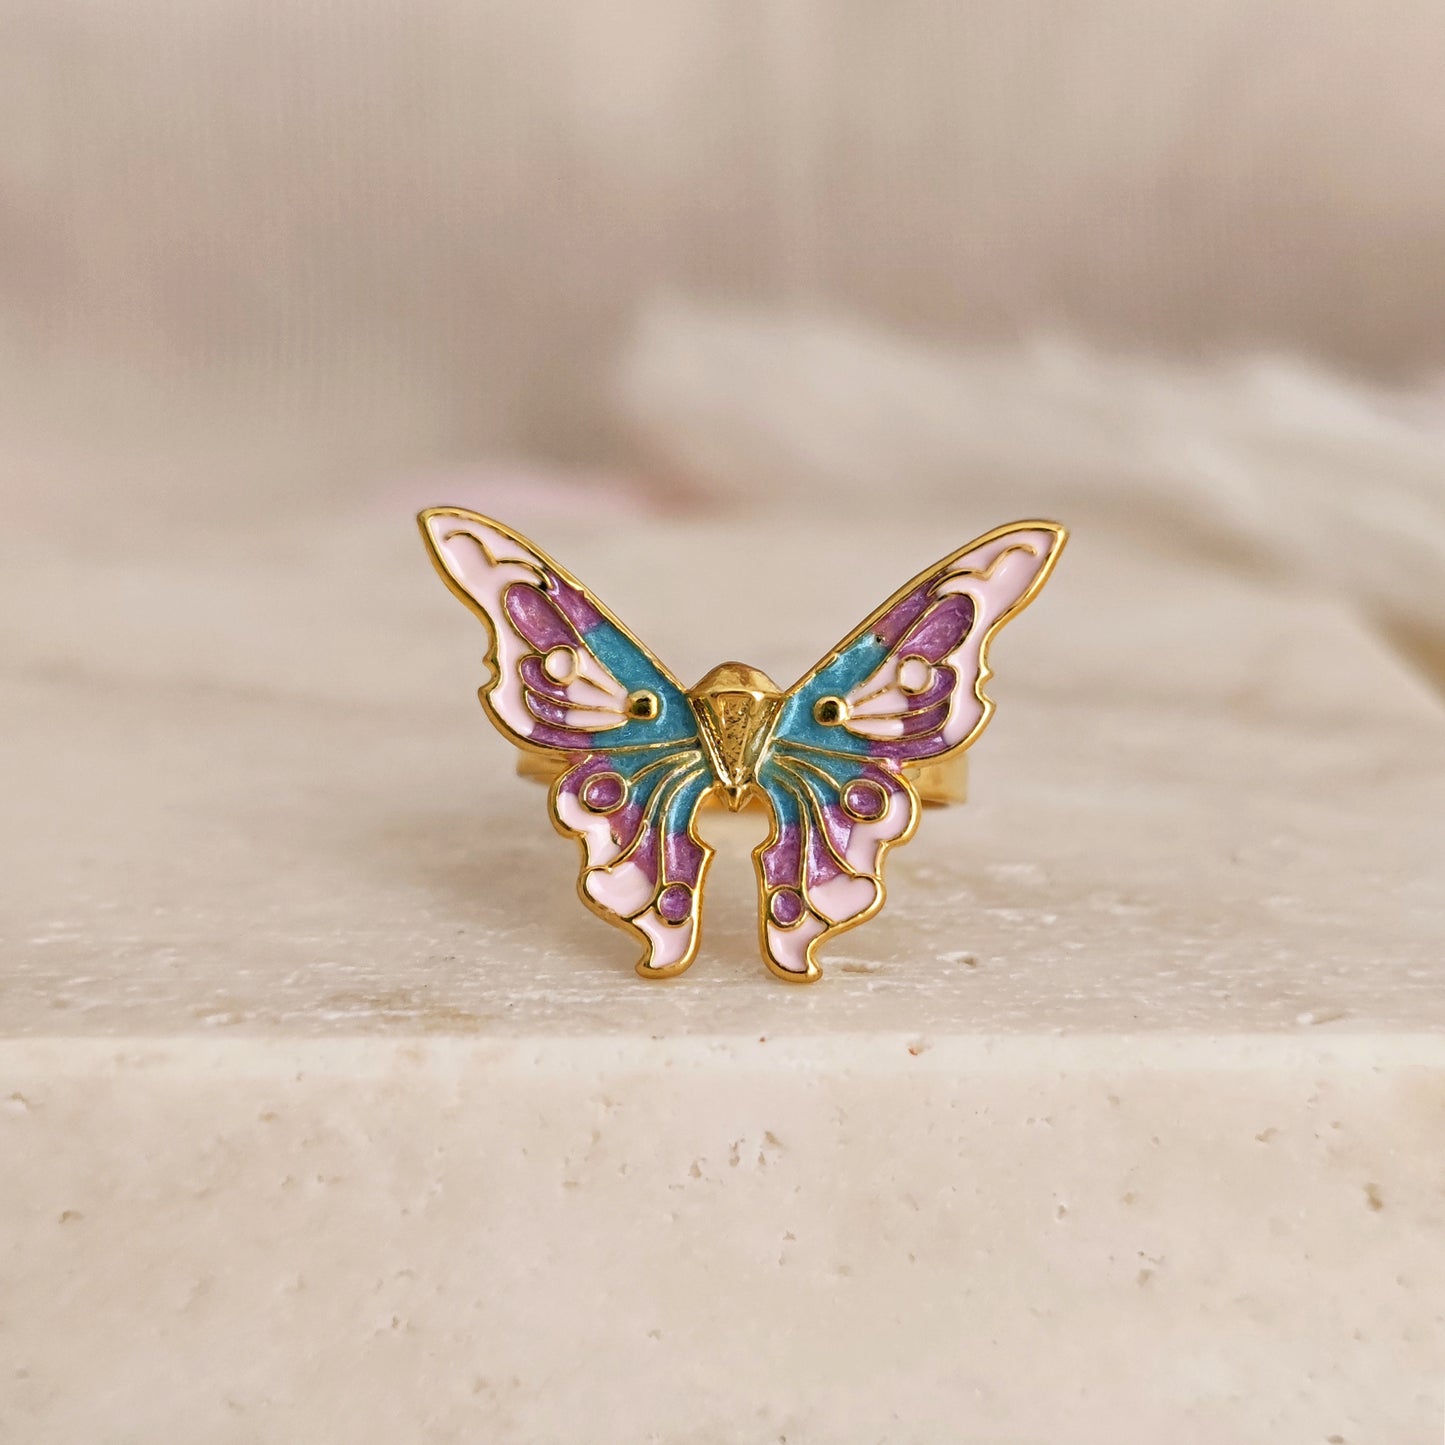 Fairy Butterfly Princess Ring, Mariposa Pastel Ring, Princess core Butterfly Ring, Coquette Princess Ring, Y2K Ring